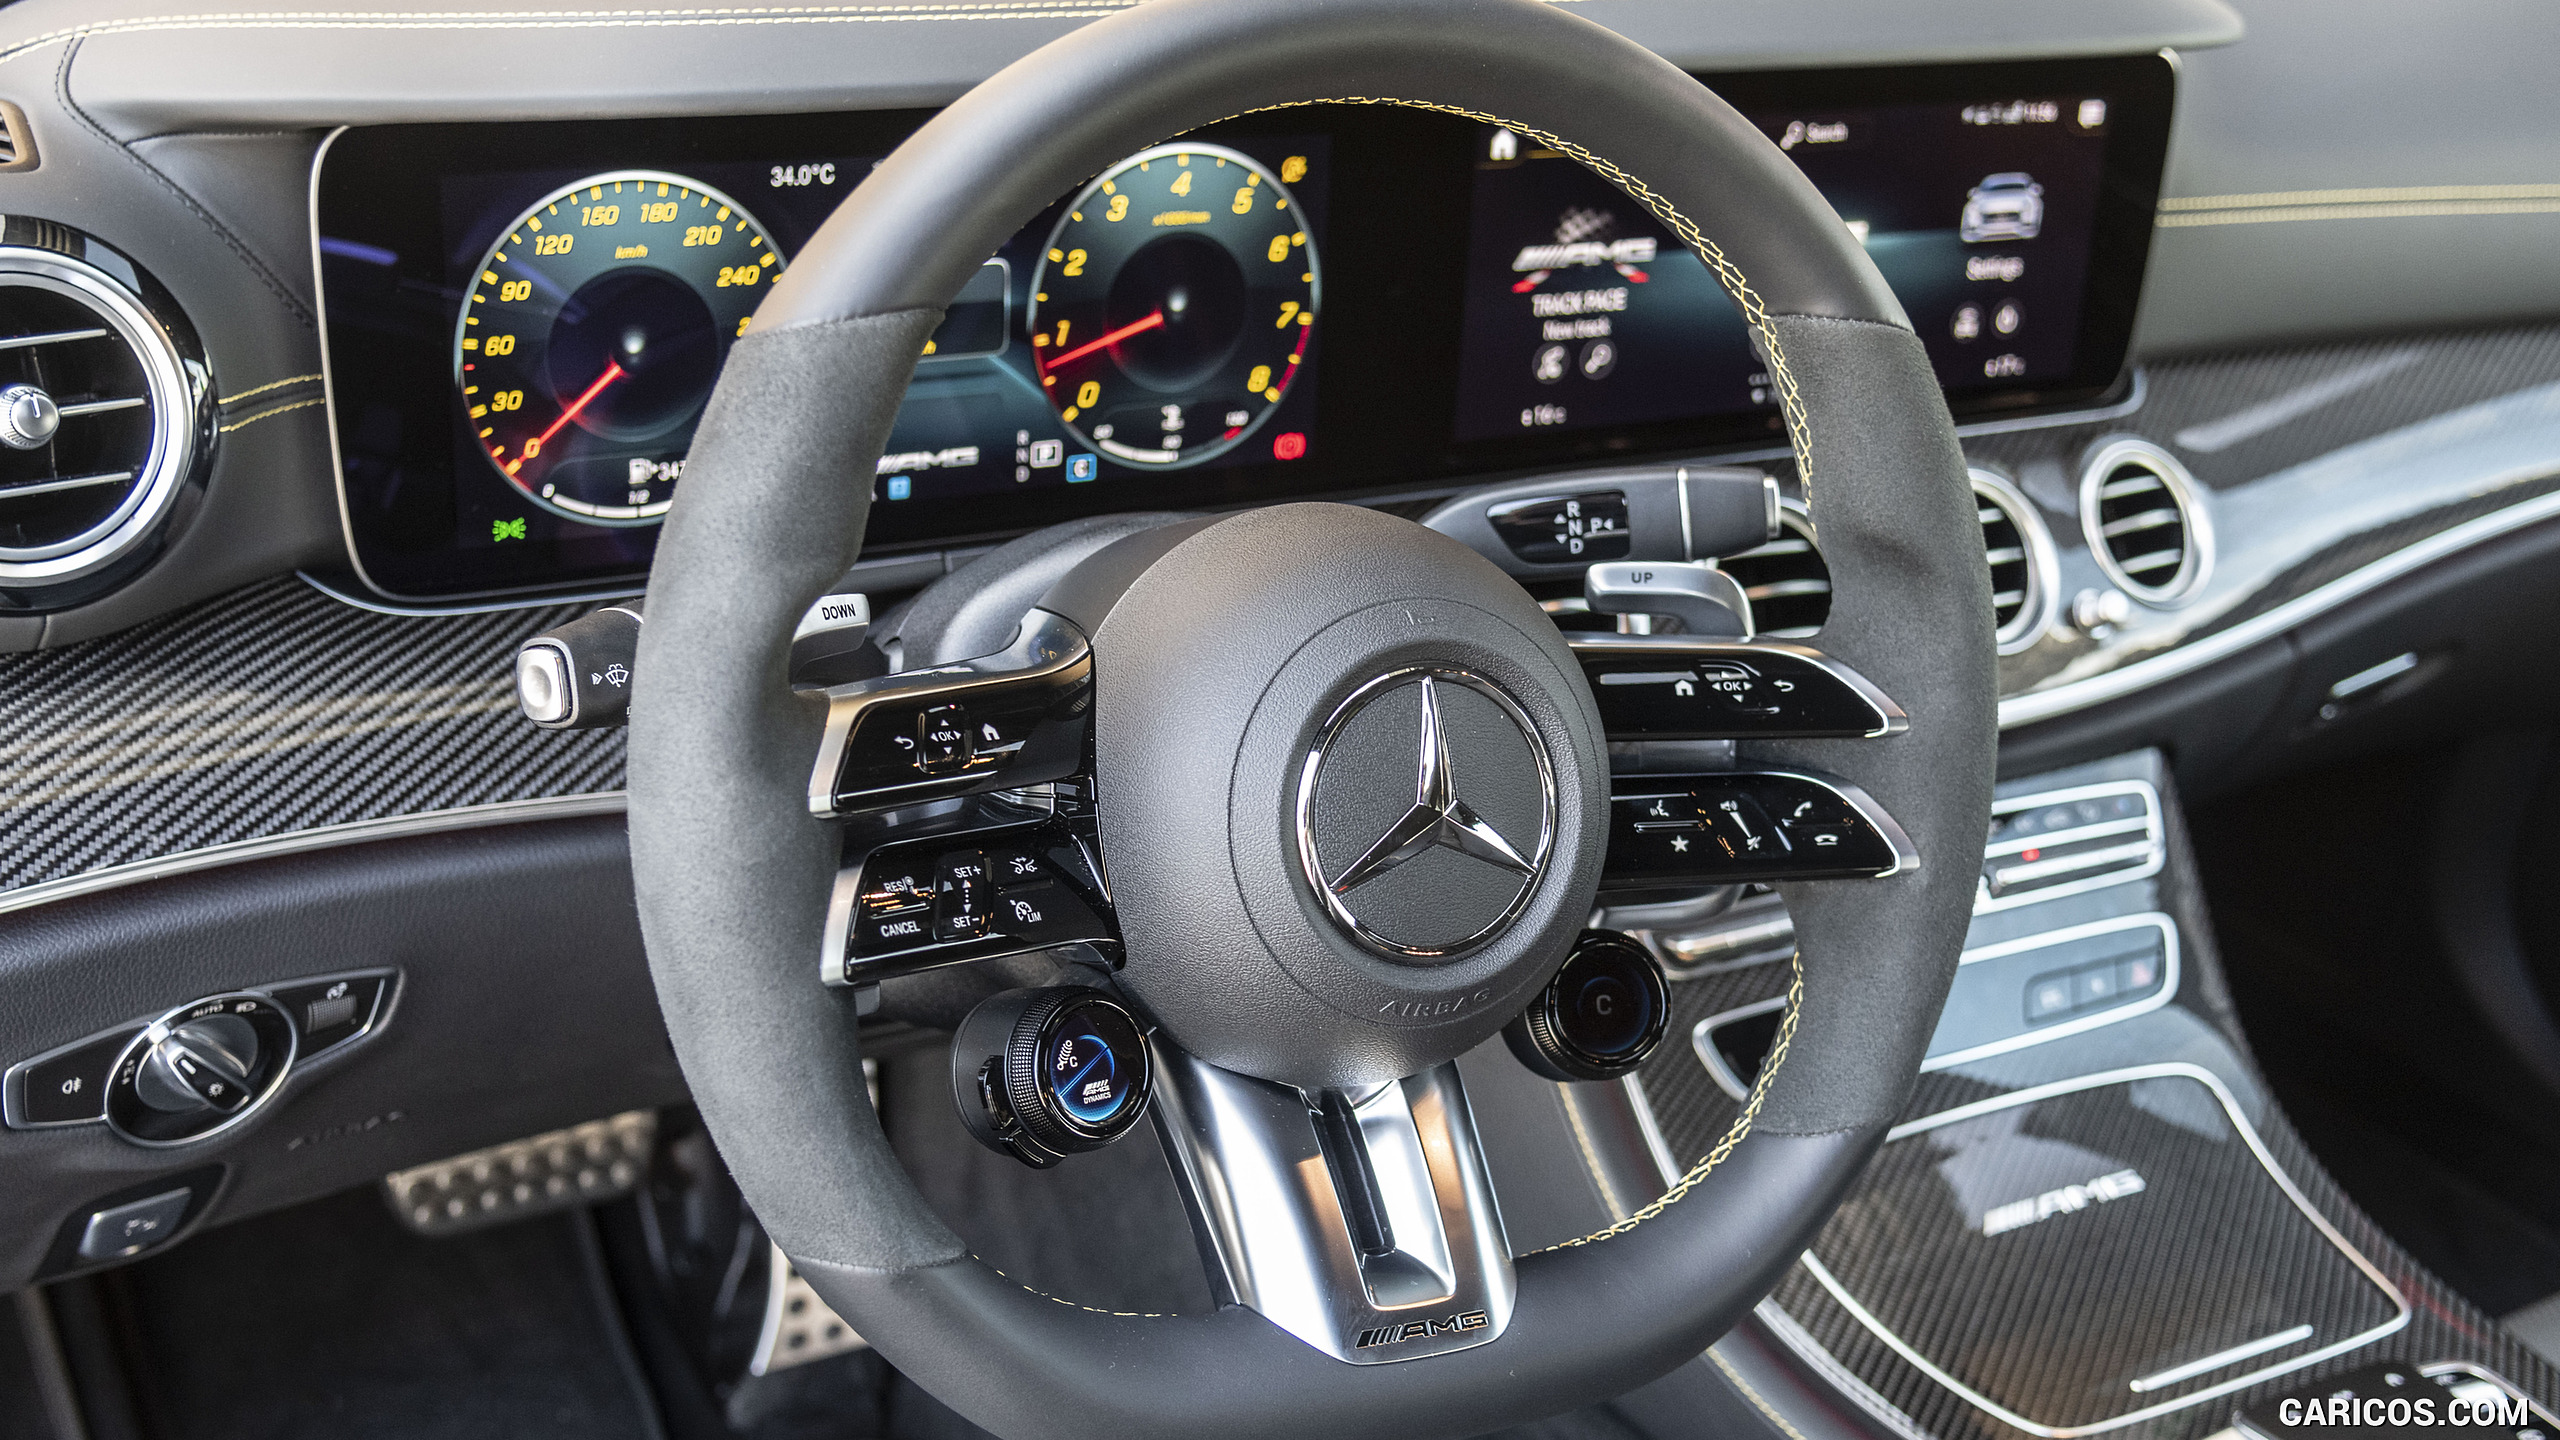 2021 Mercedes-AMG E 63 S 4MATIC+ - Interior, Steering Wheel, #75 of 143